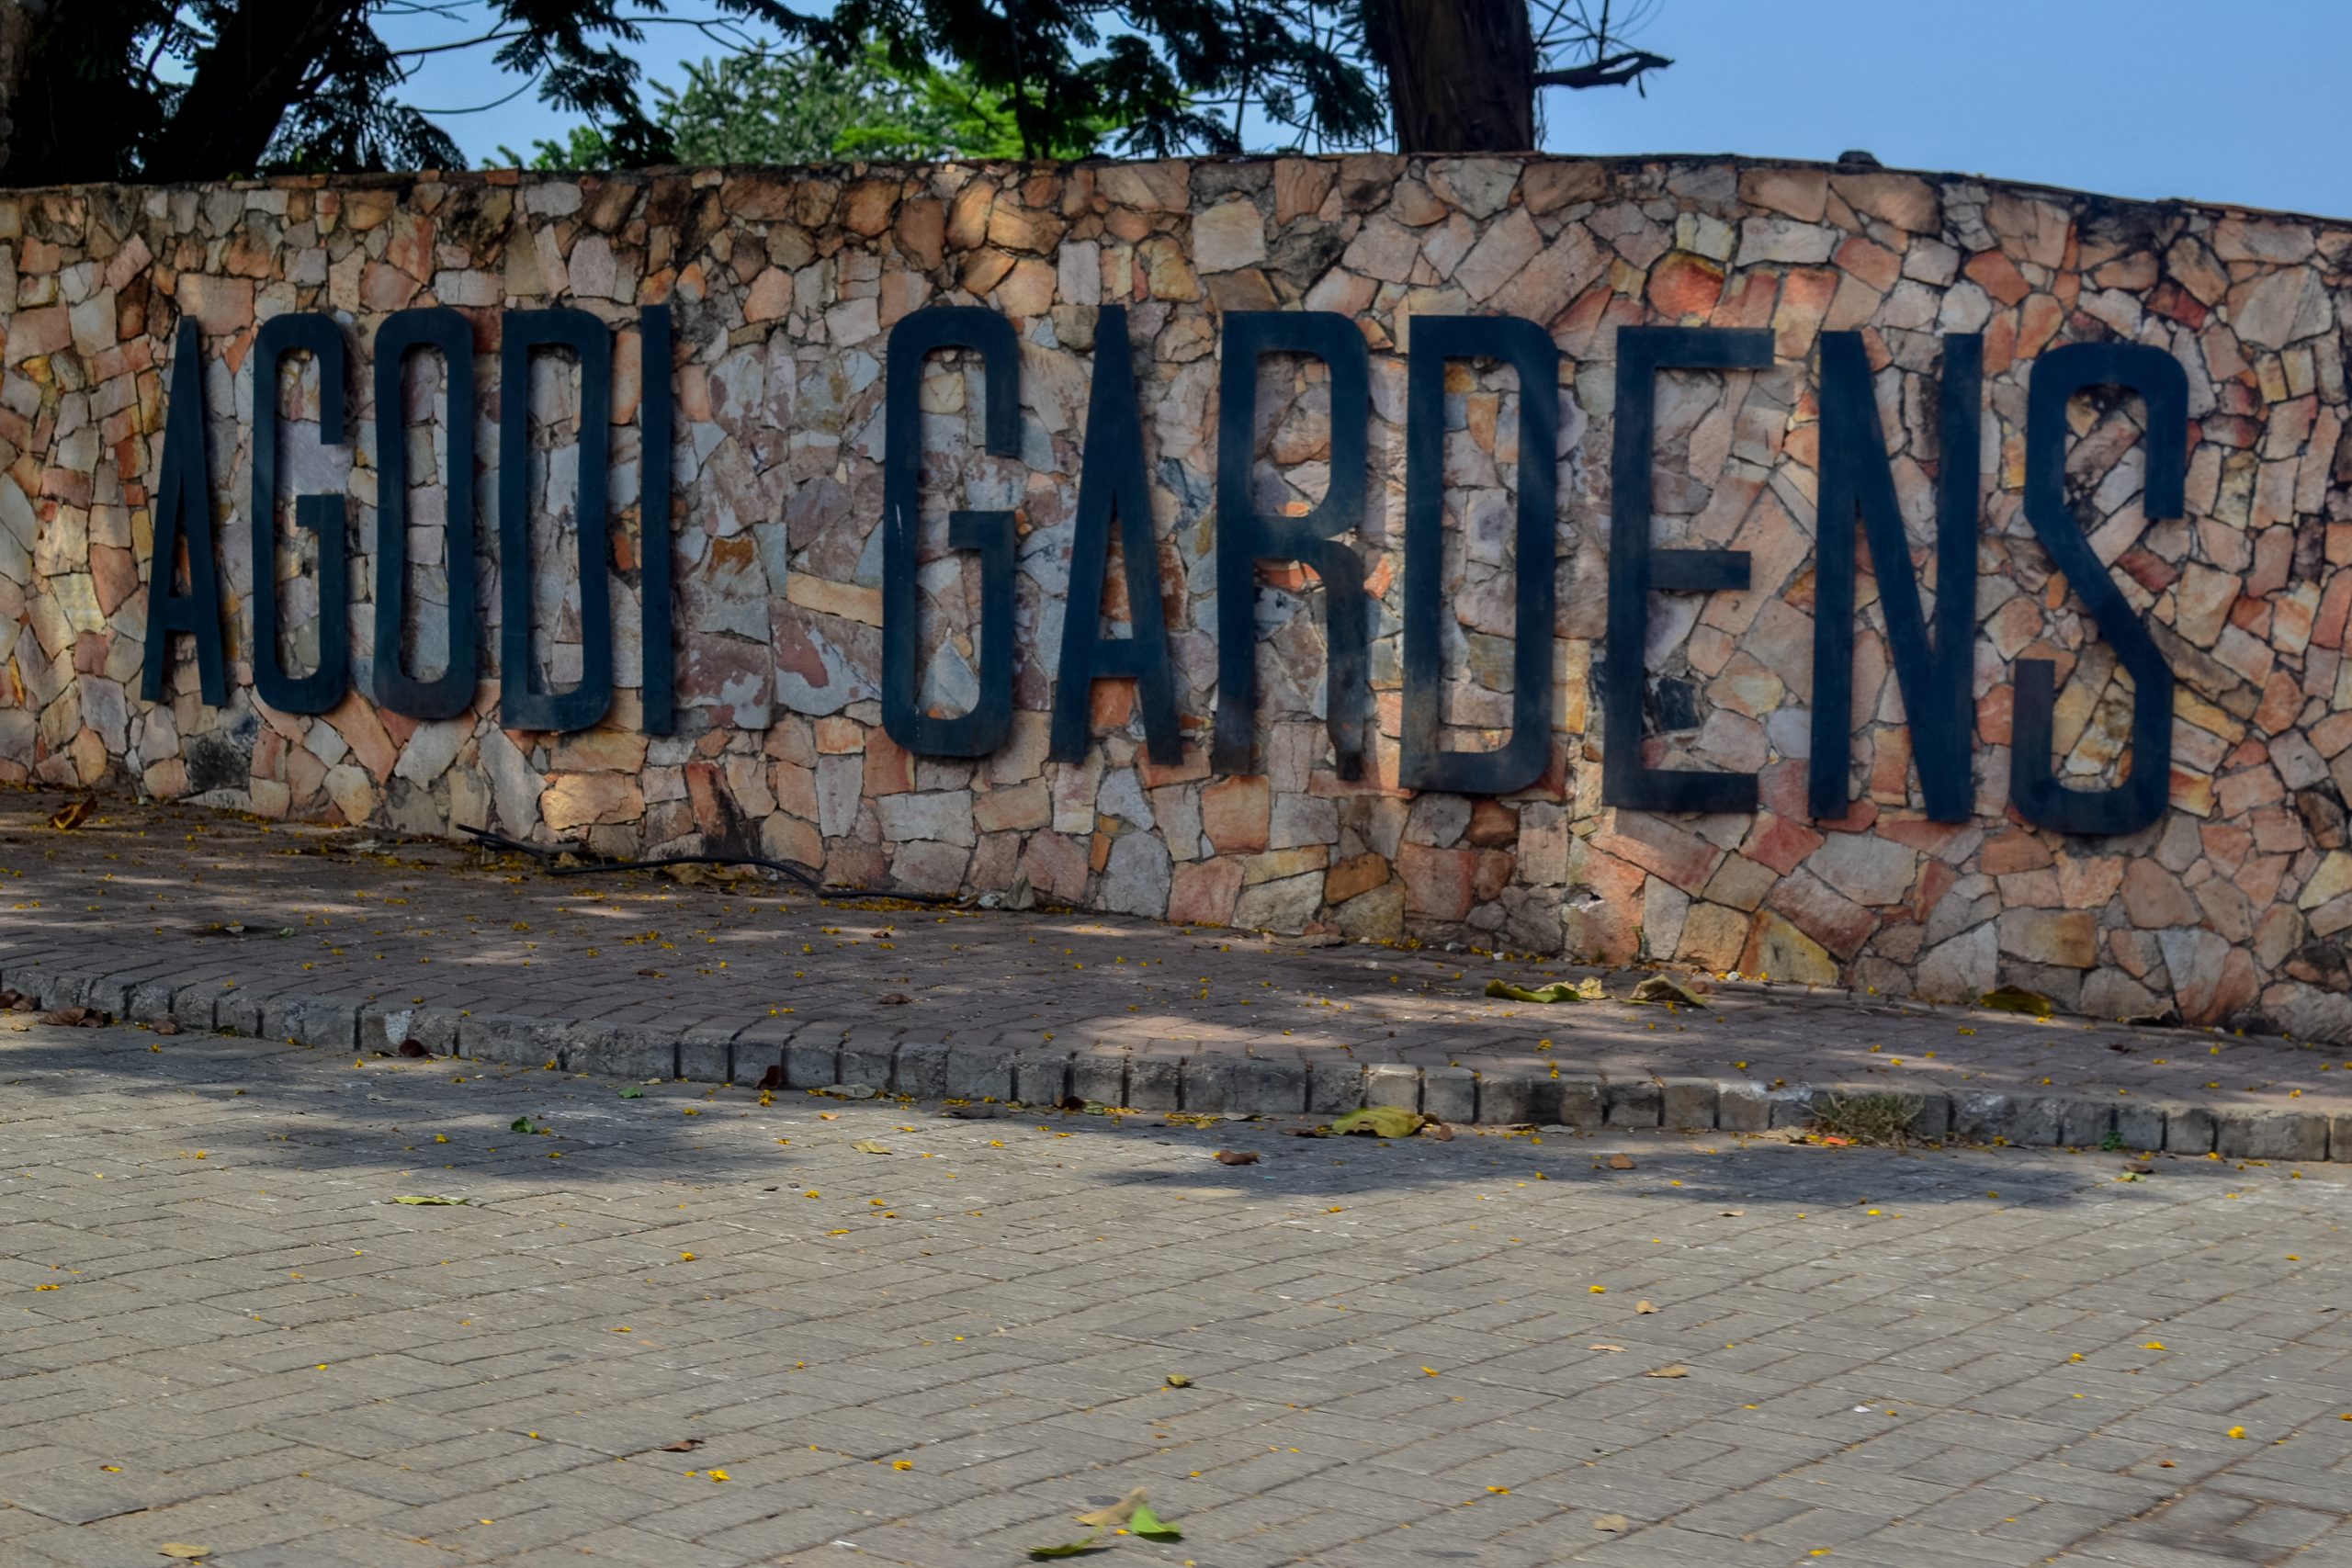 Agodi Garden: A Haven of Peace and Tranquility